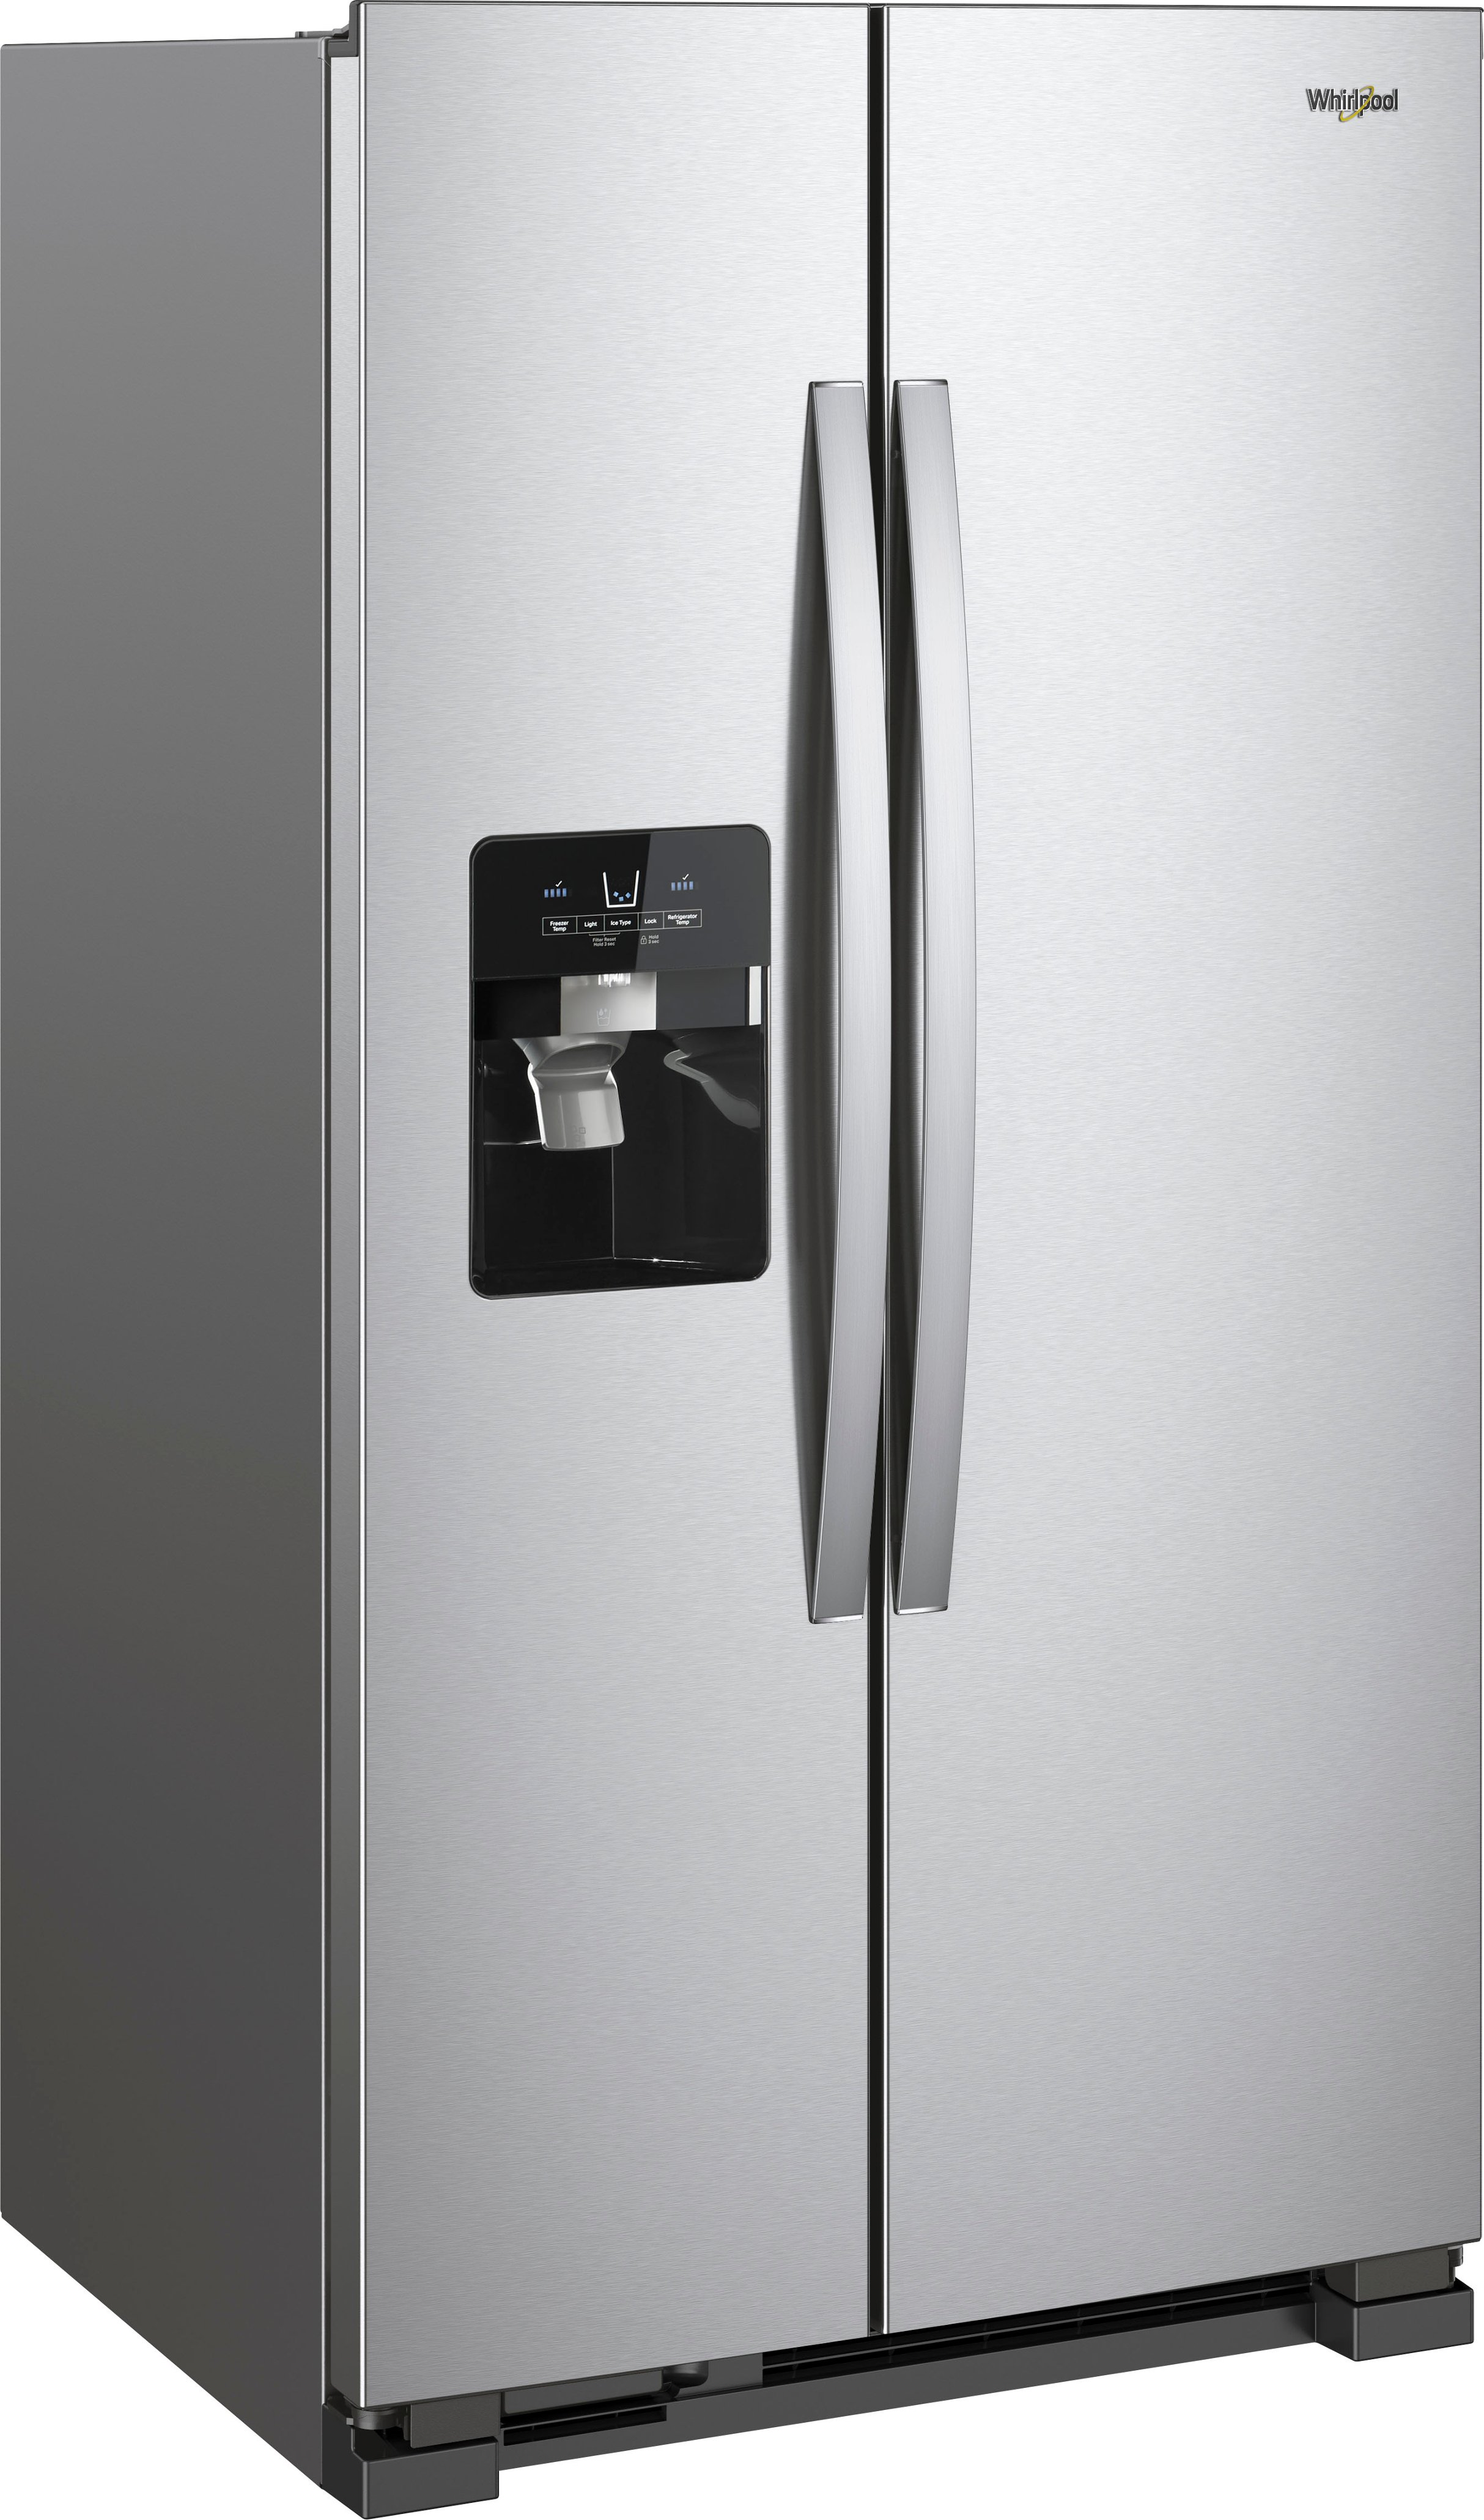 Angle View: Whirlpool - 24.5 Cu. Ft. Side-by-Side Refrigerator - Stainless steel